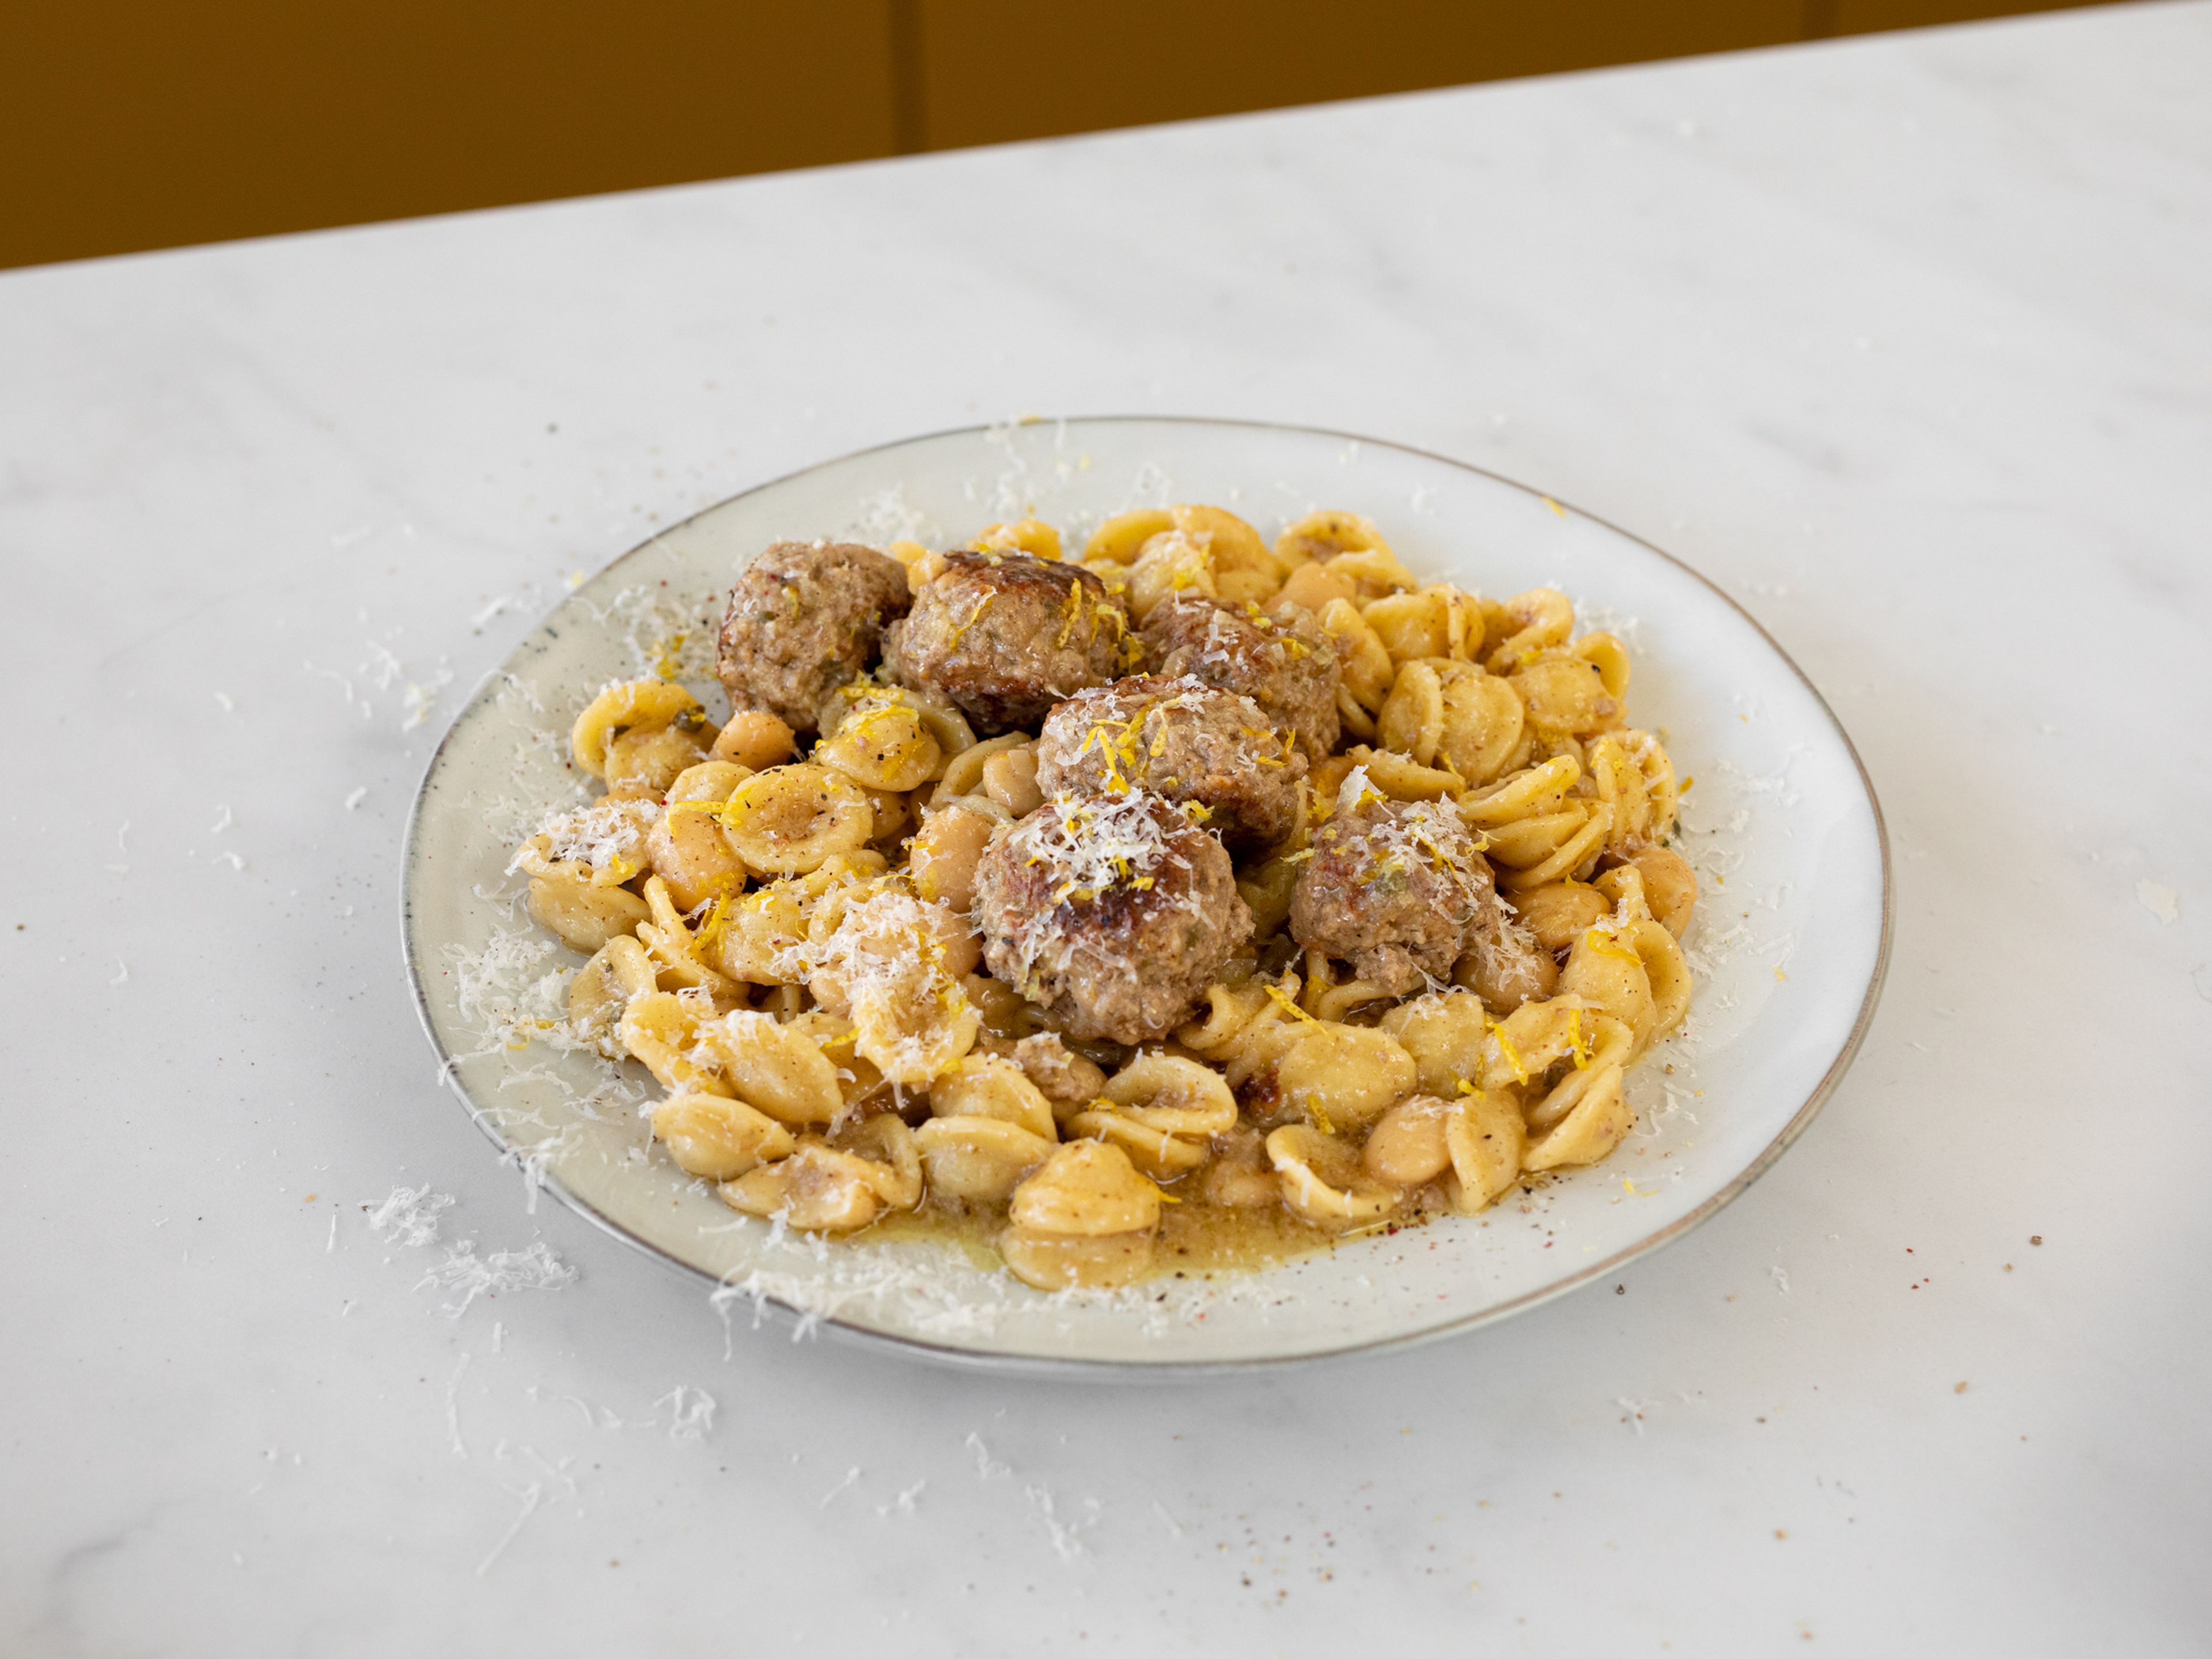 Christian's one-pot pasta with meatballs